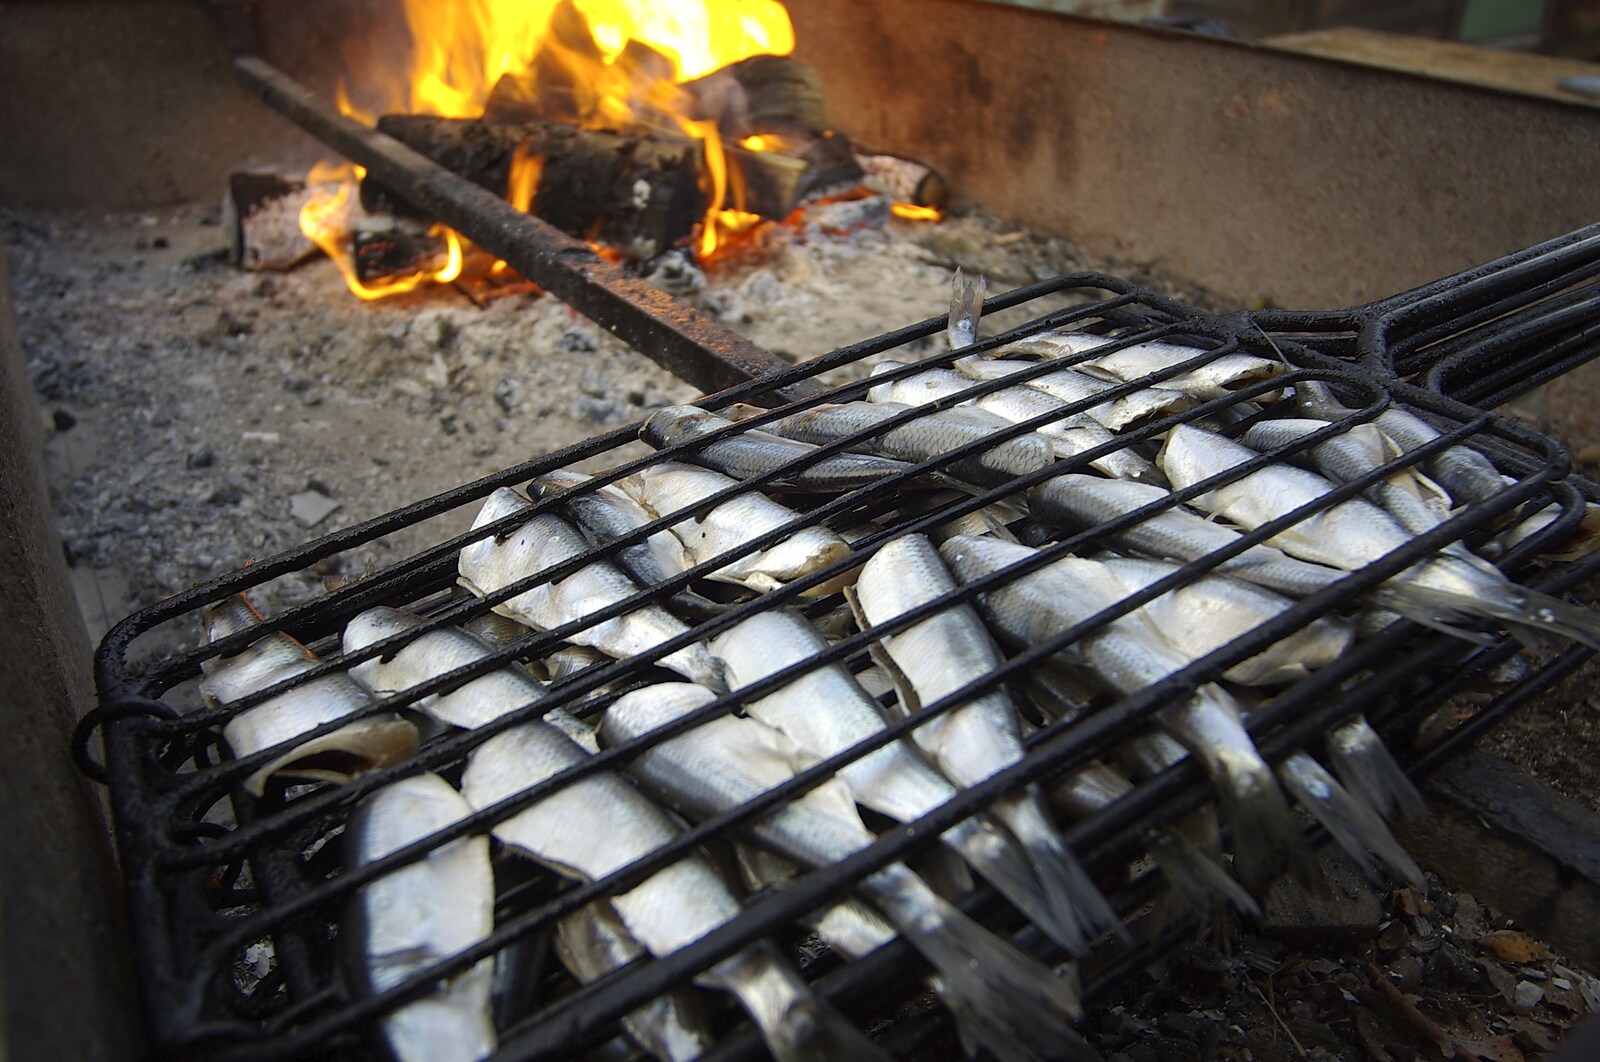 Herrings are readied for cooking on an open fire from A Few Hours in Skansen, Stockholm, Sweden - 17th December 2007